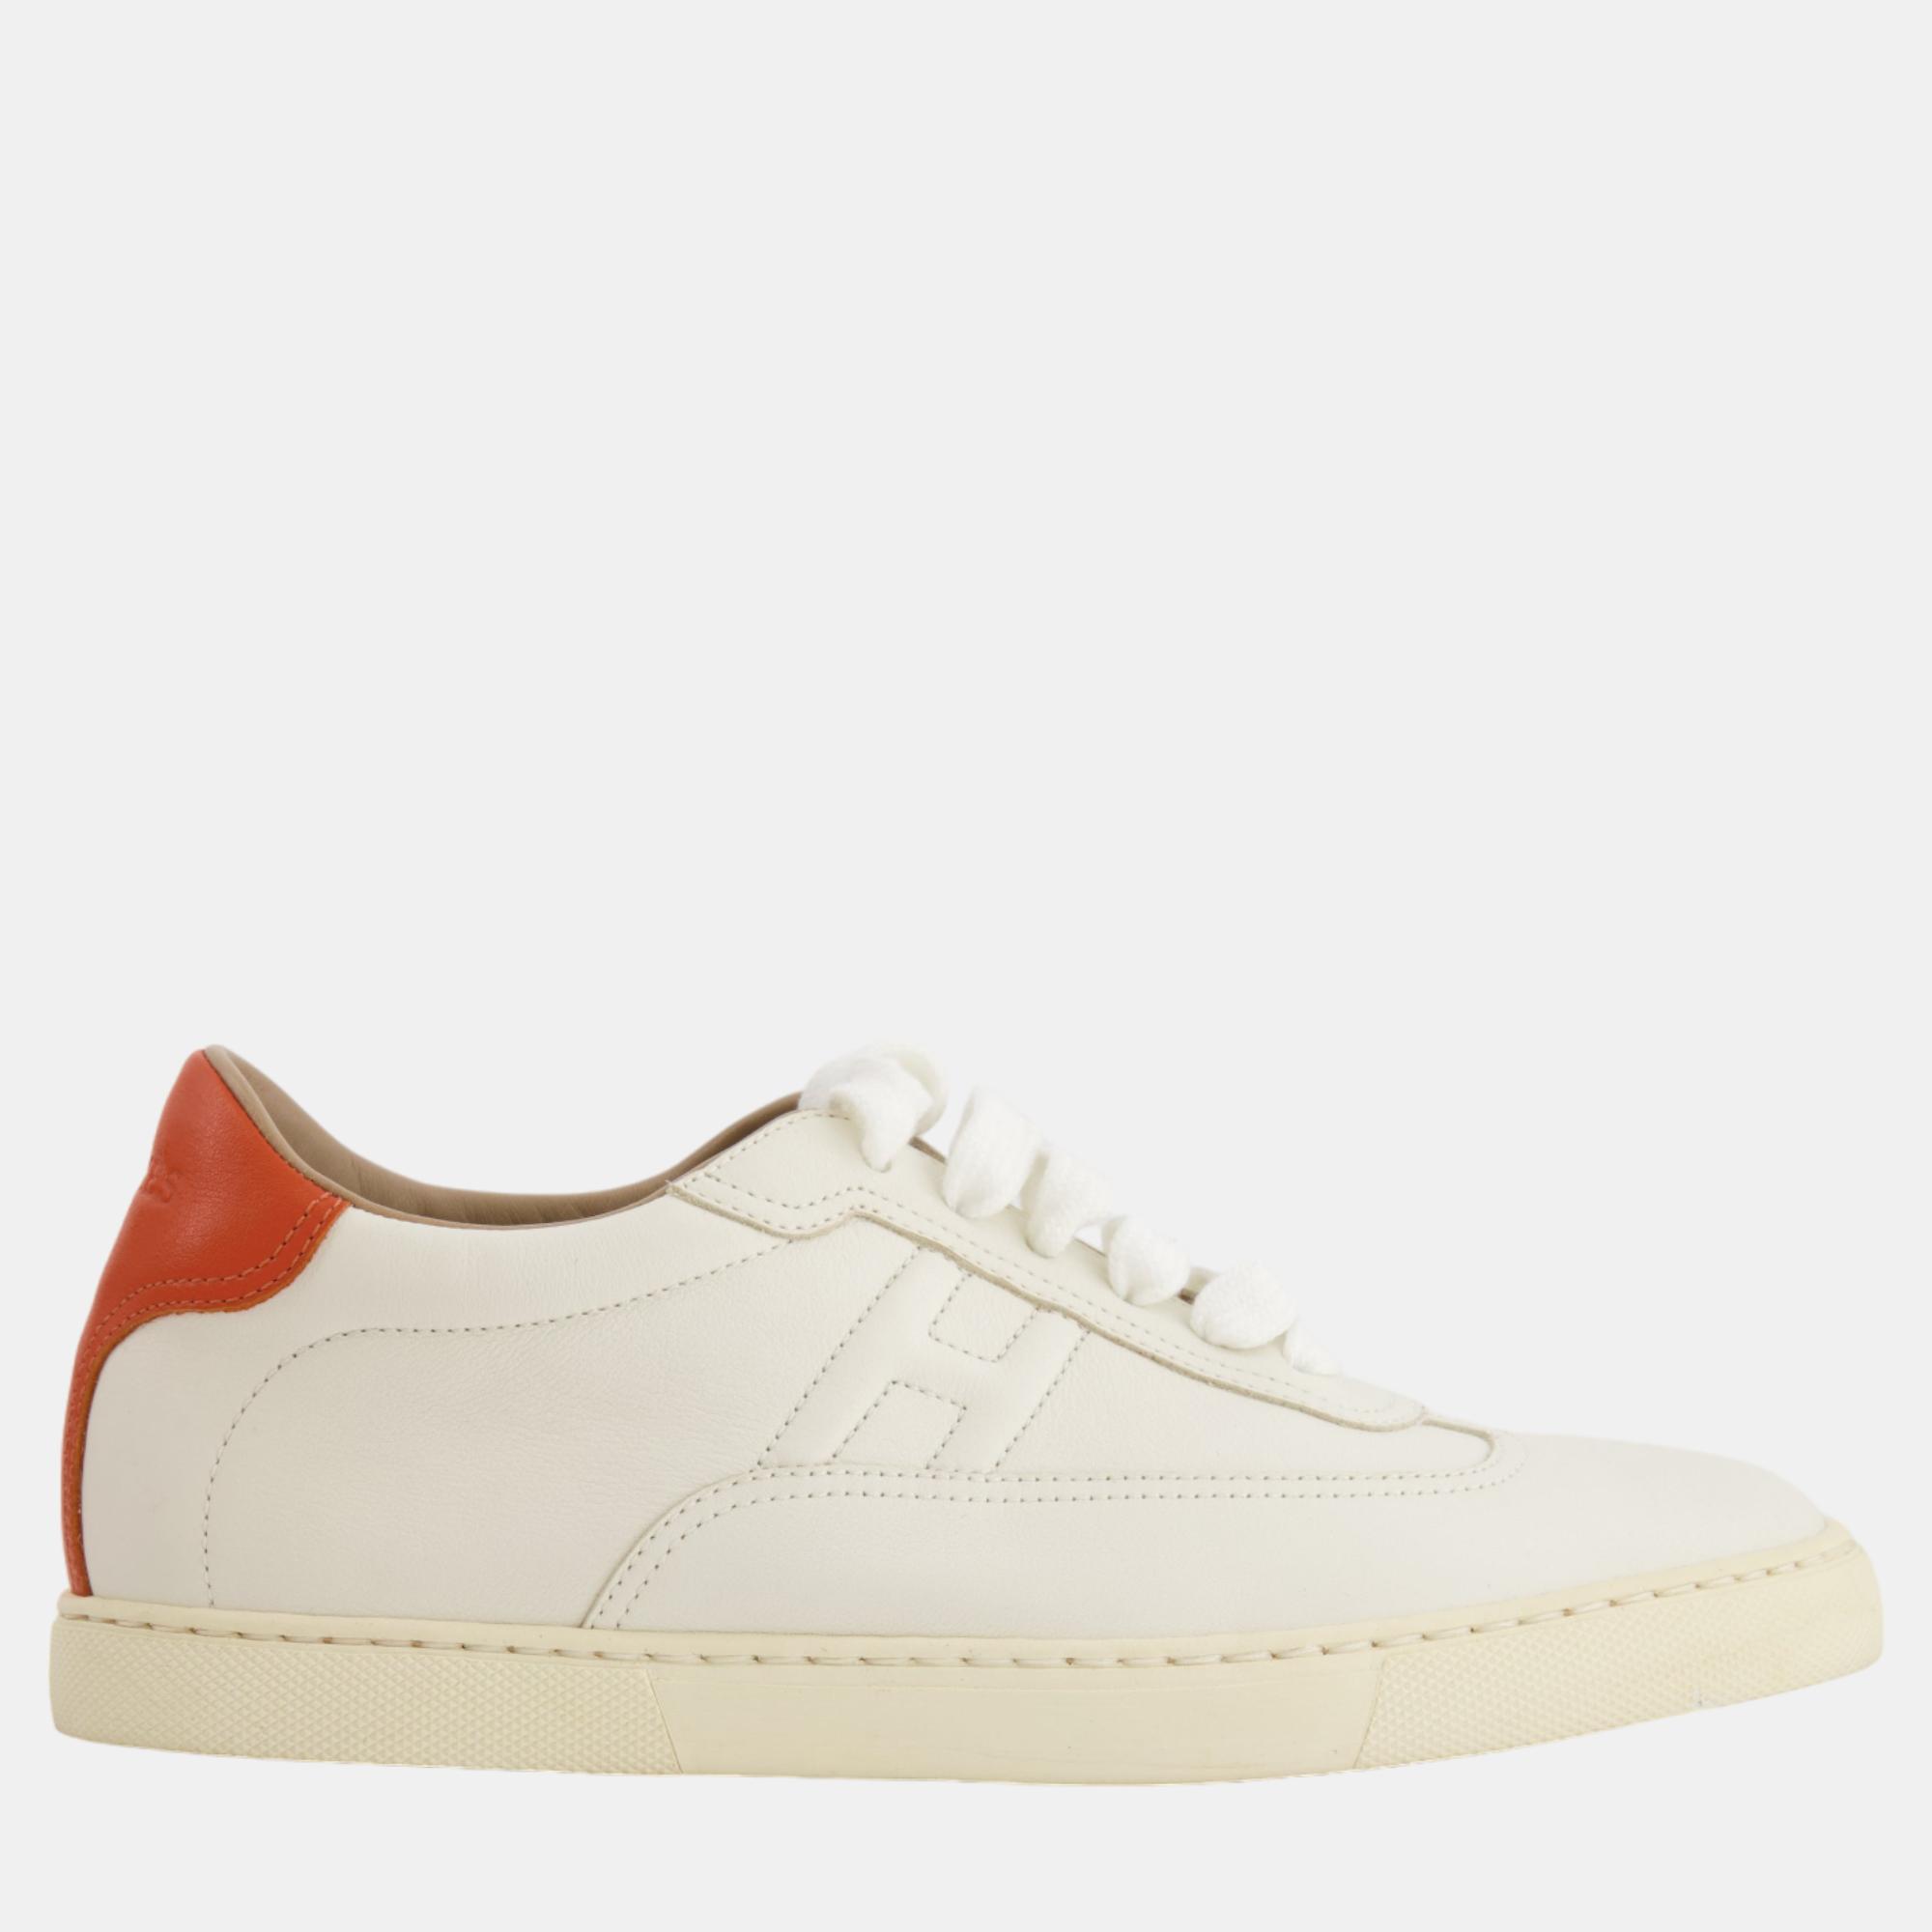 Hermes white and orange calfskin leather quicker trainers size eu 36